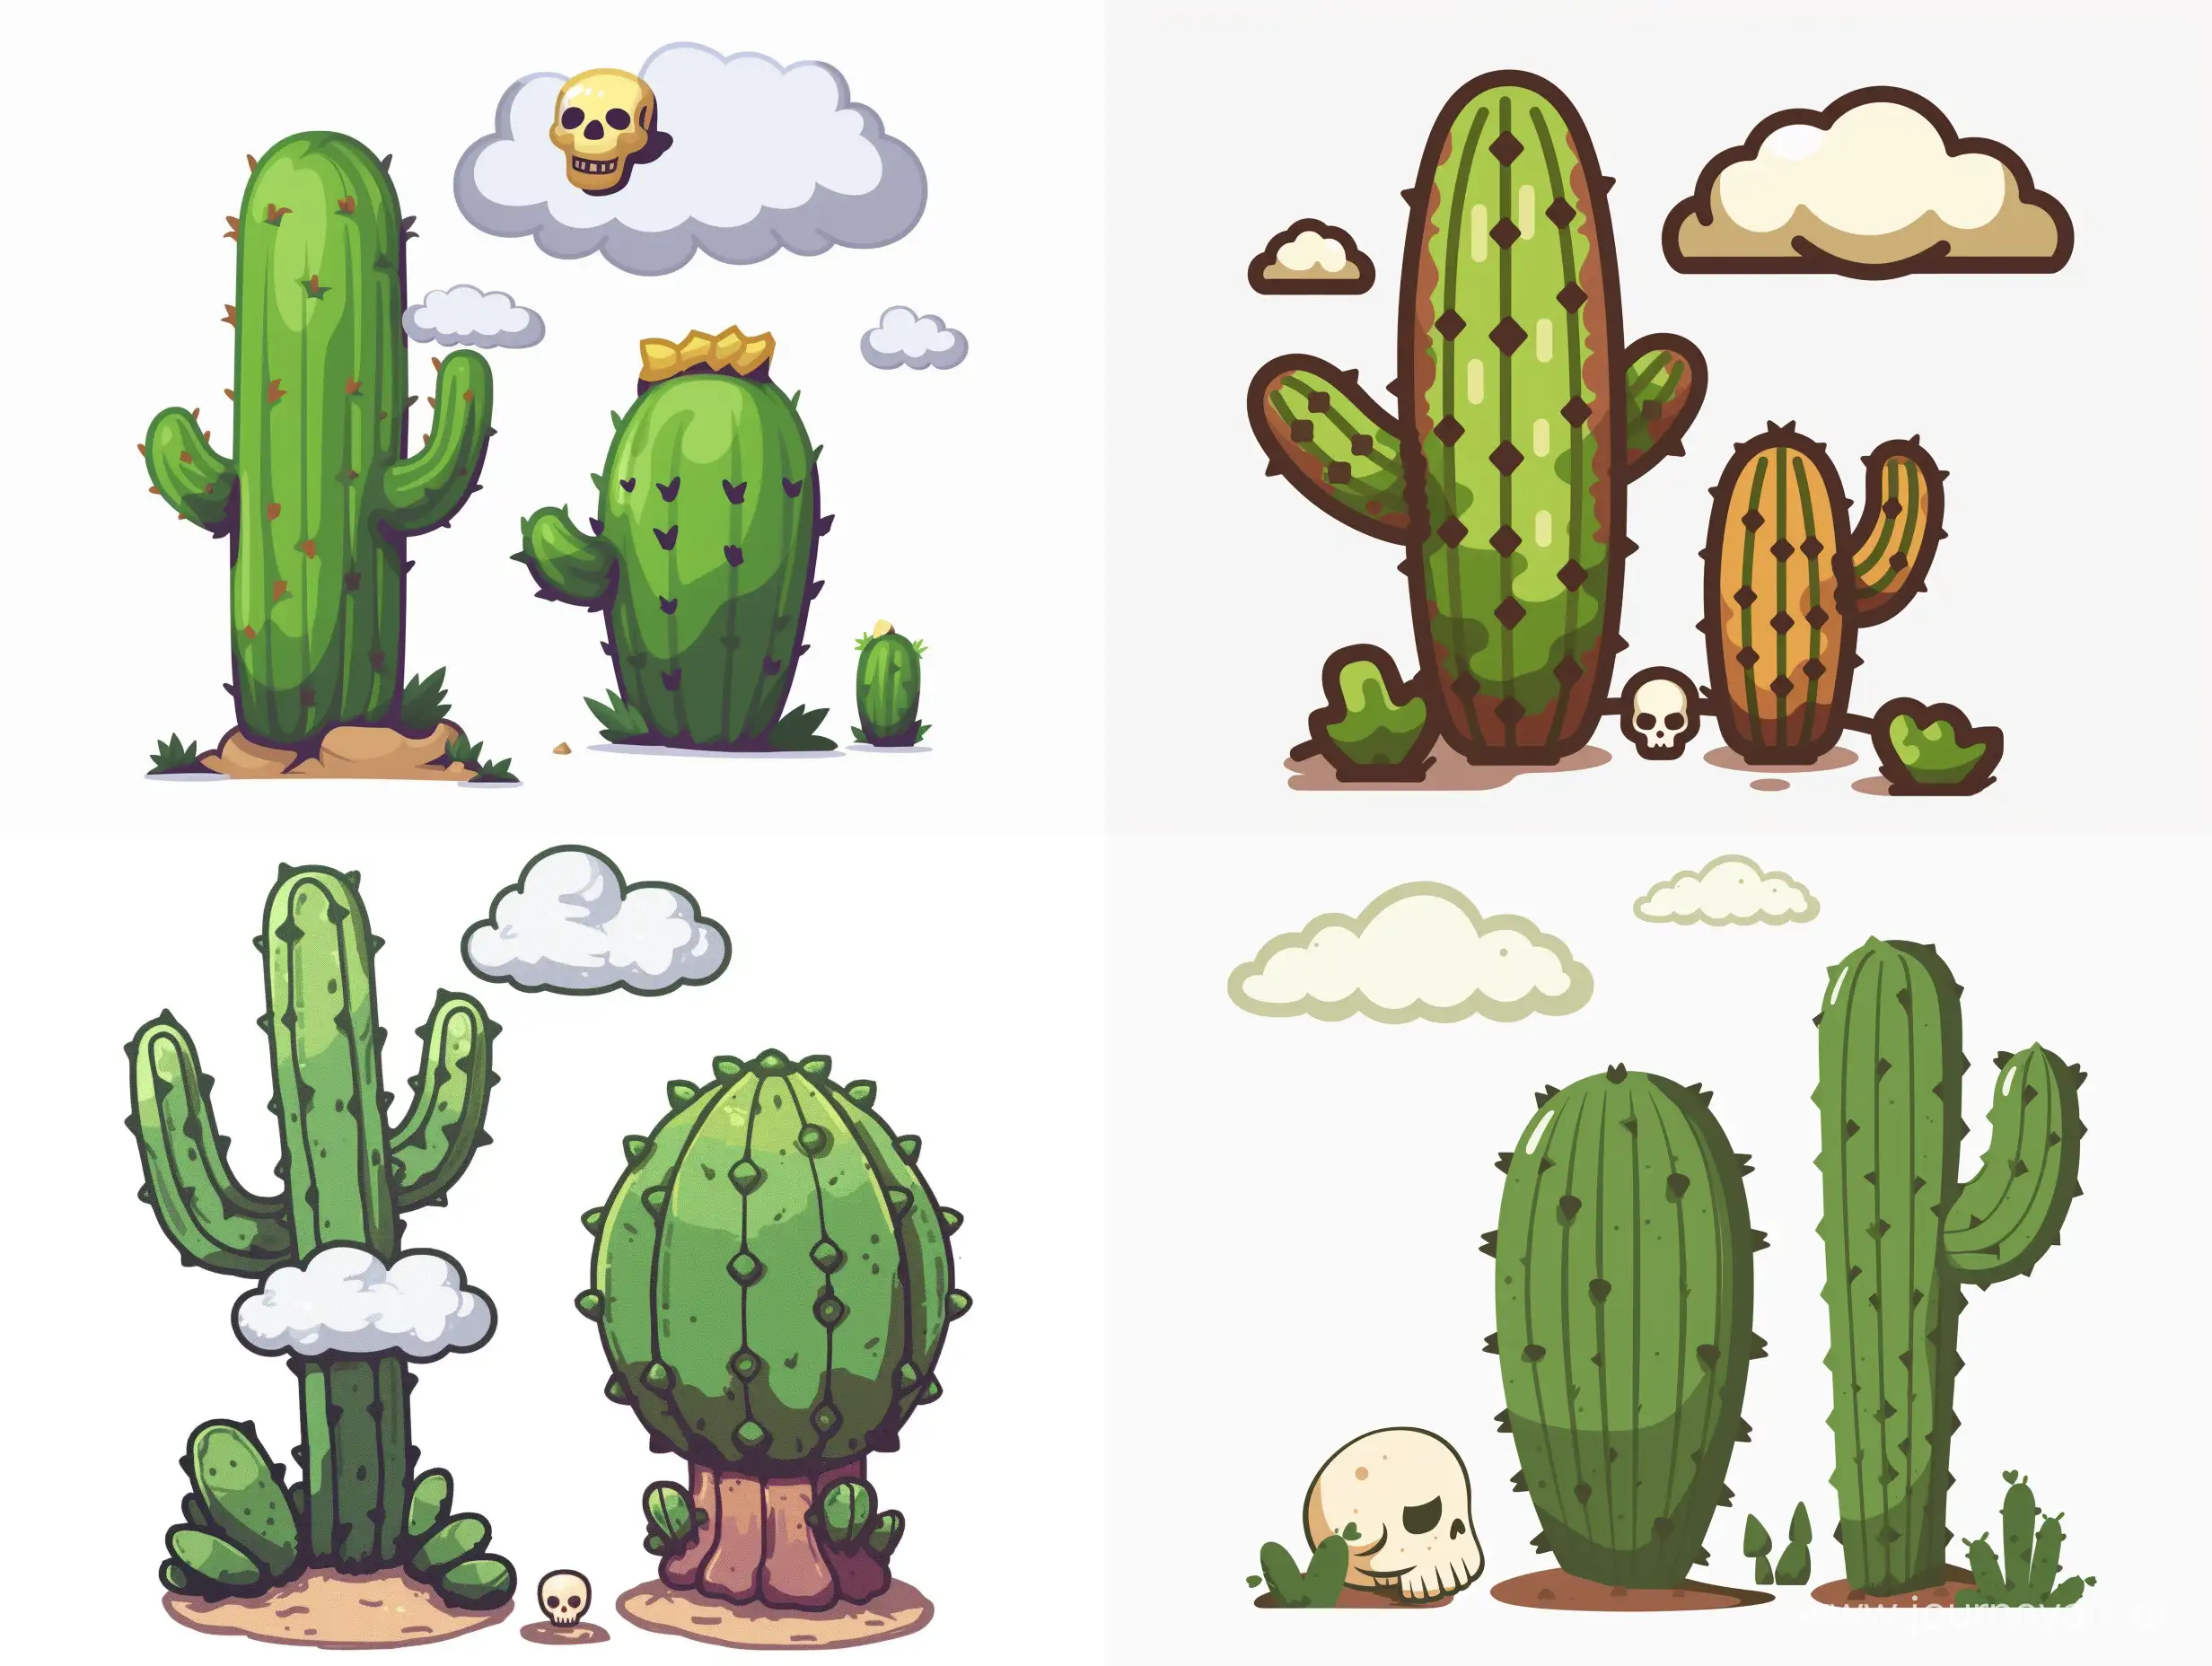 Desert-Cactus-Landscape-with-Skull-and-Clouds-2D-Game-Style-Art